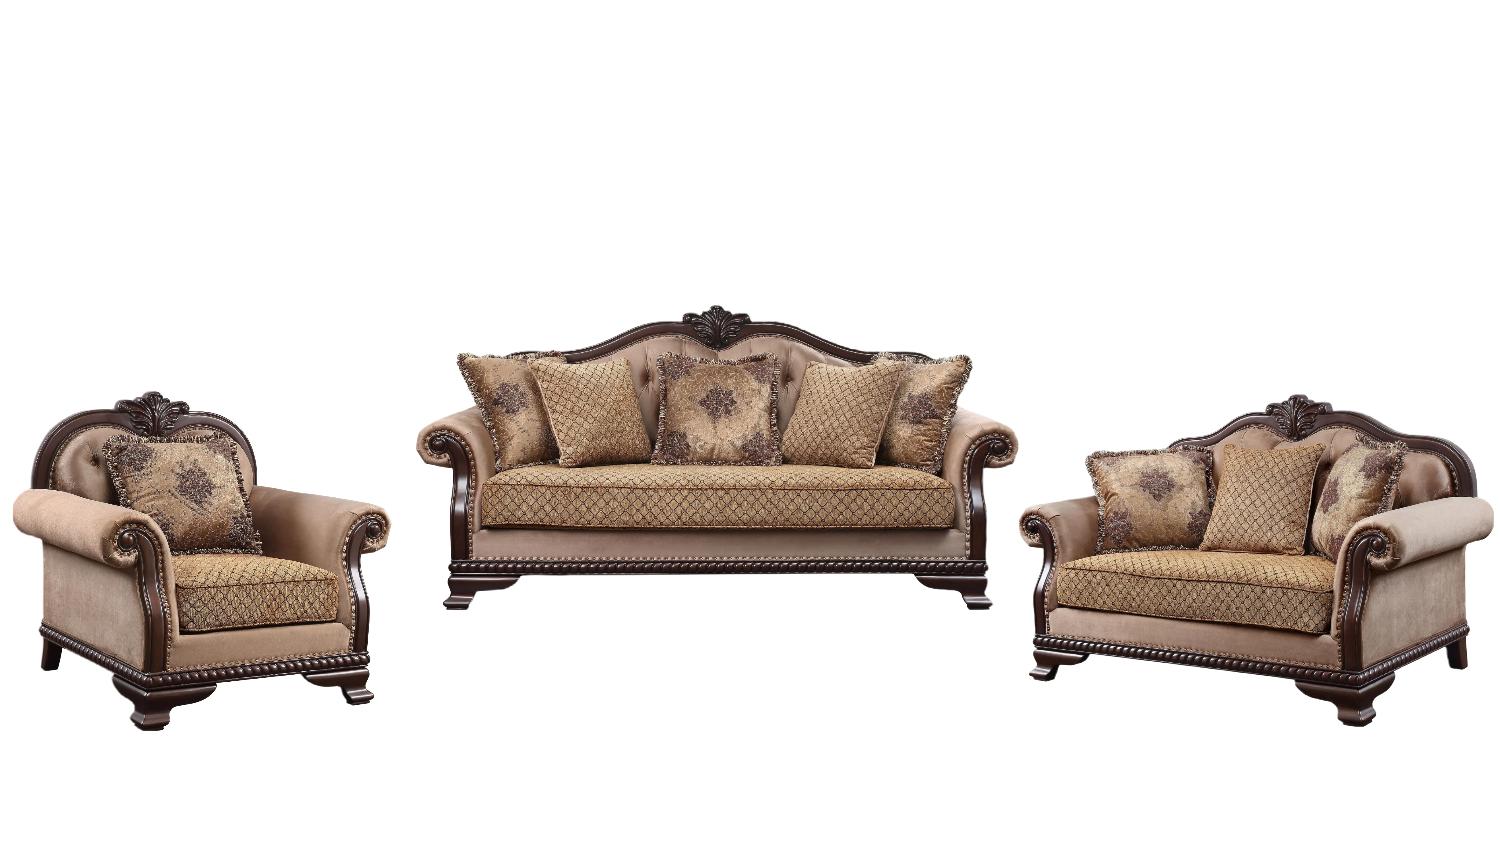 Classic Sofa Loveseat and Chair Set Chateau De Ville 58265-3pcs in Tan Fabric